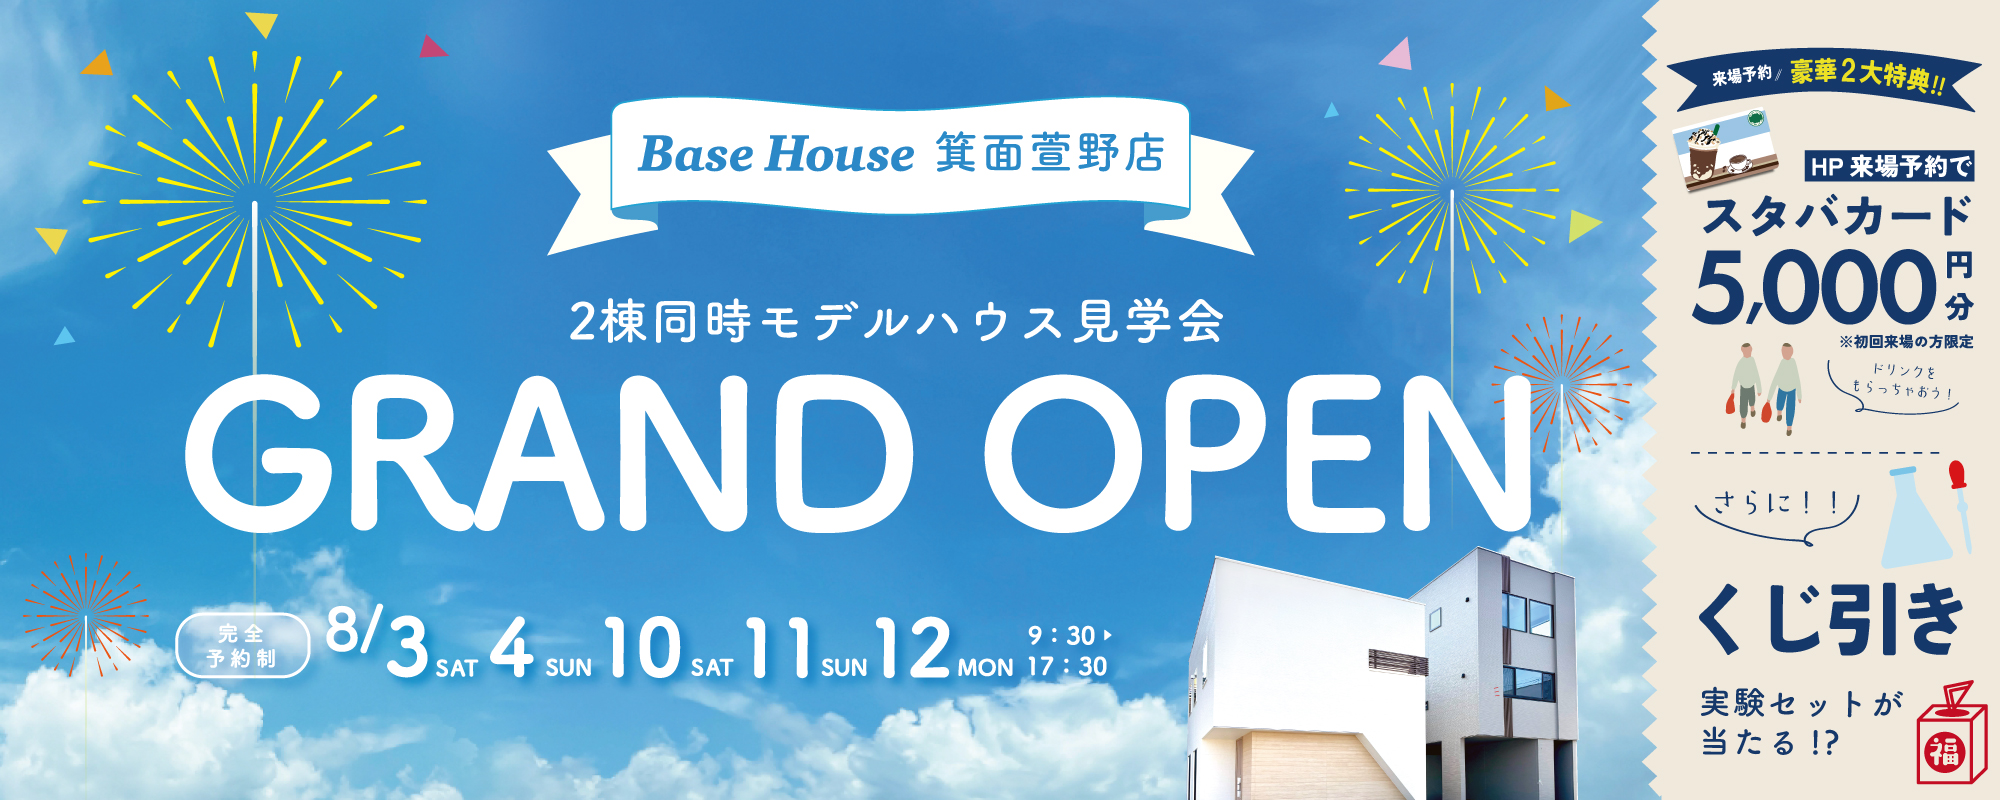 【GRAND OPEN】Base House箕面萱野店　ご来場でスタバカードプレゼント!